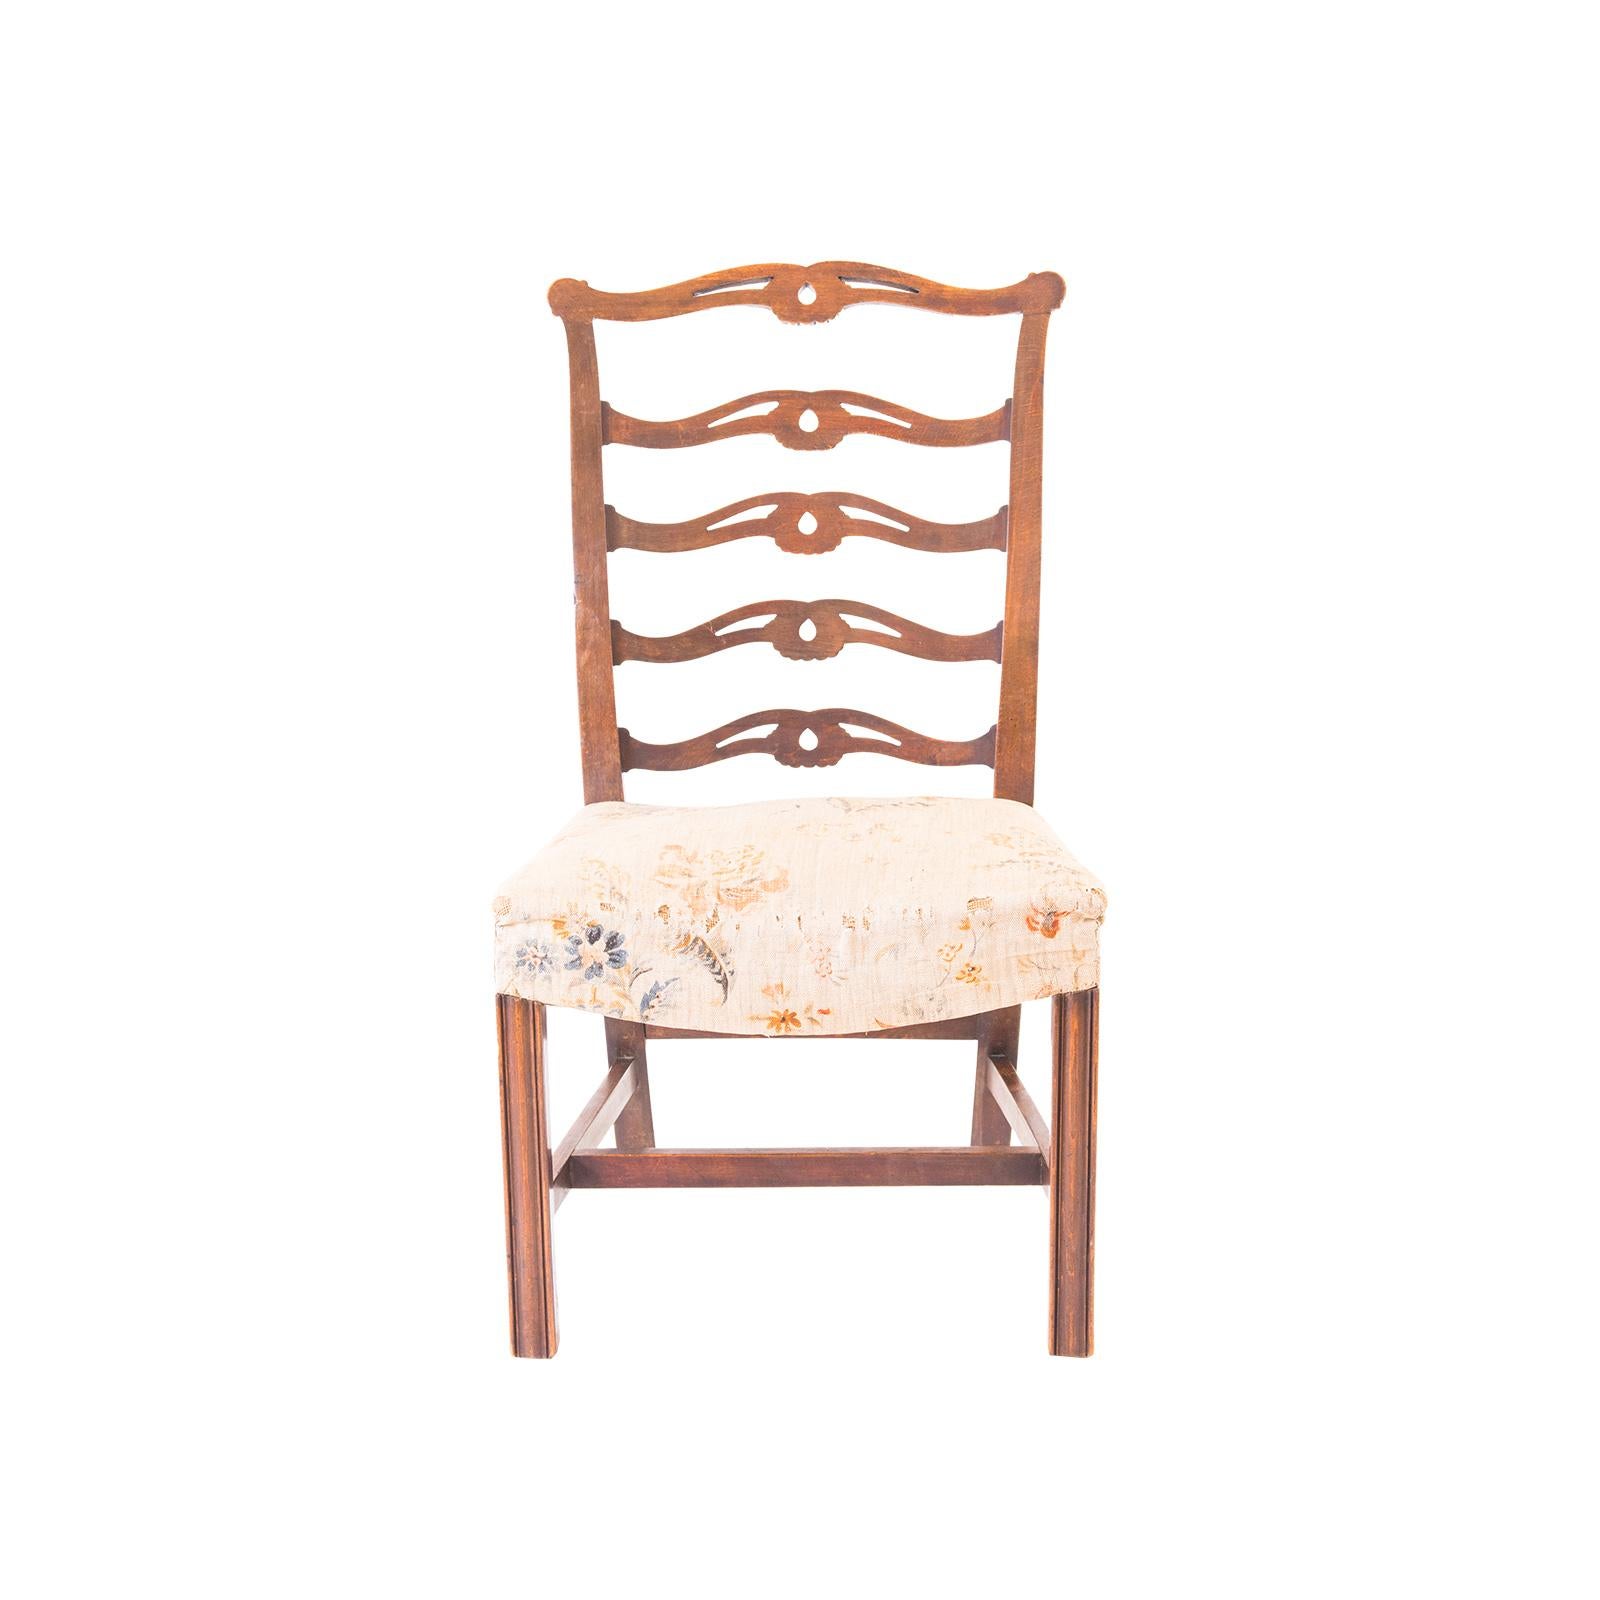 Hand-Crafted Original and Documented Jugendstil Adolf Loos Chair, 20th Century, 1907 For Sale